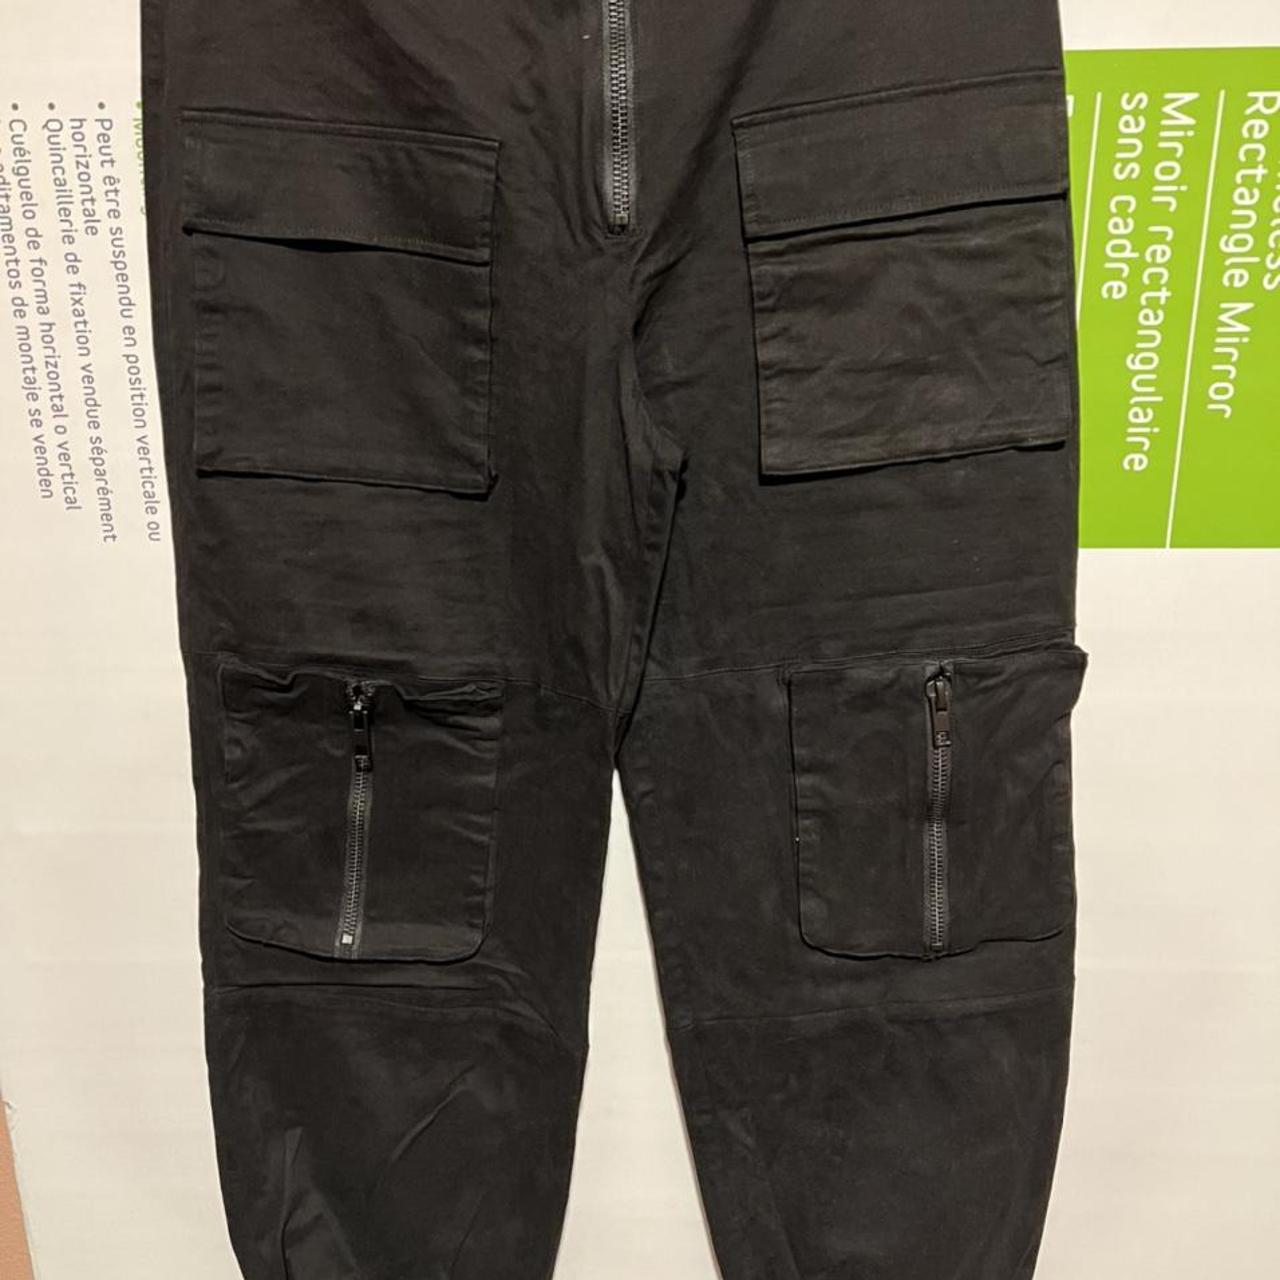 Get Real Cargo Pant from Poster Grl - XL, completely